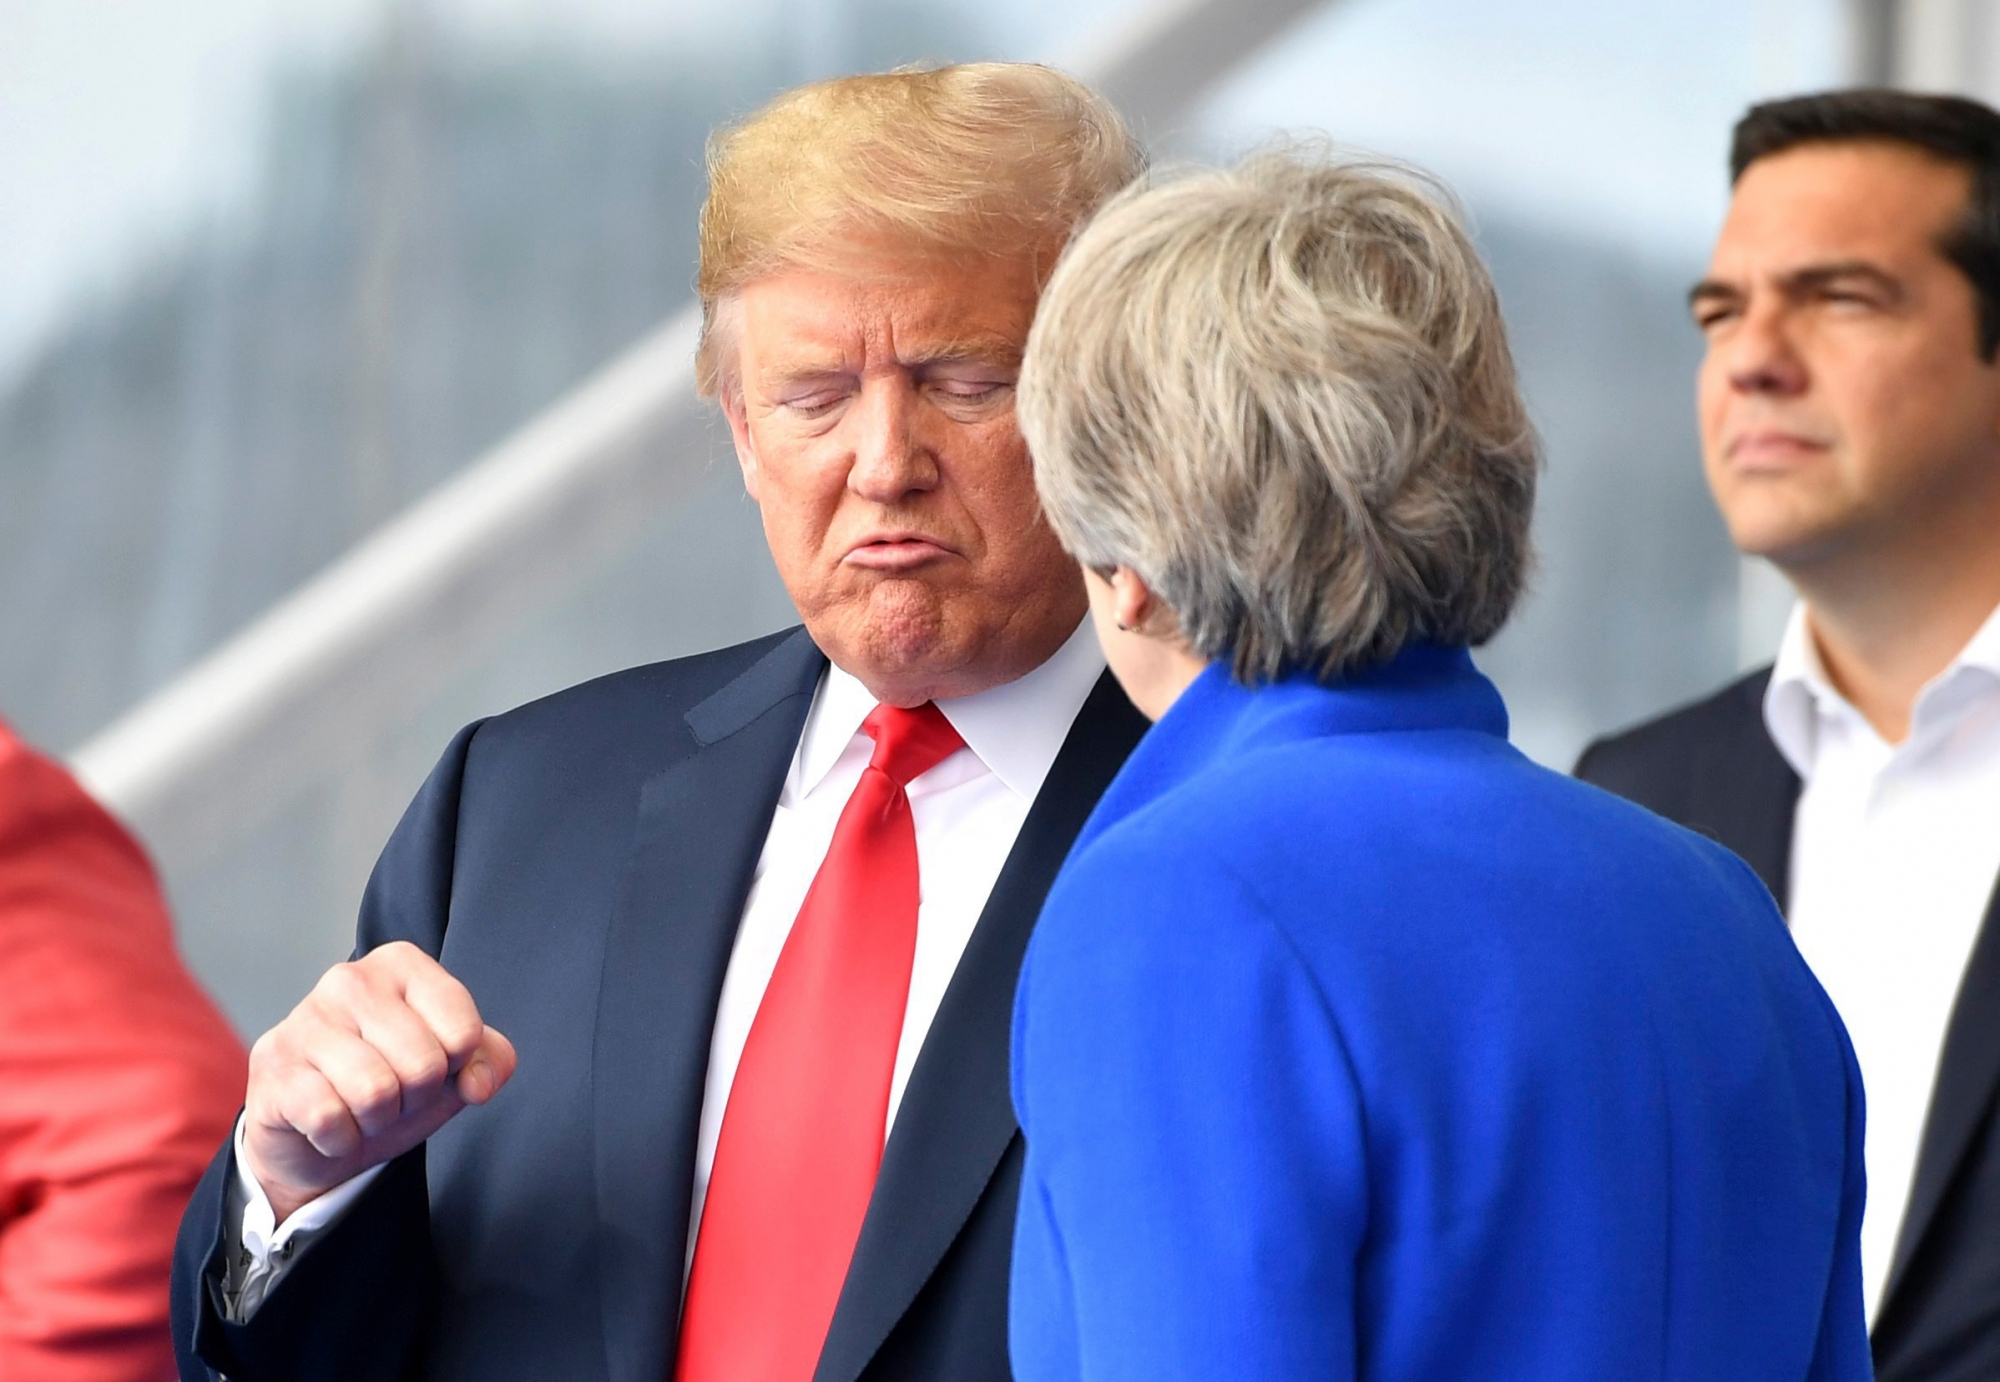 U.S. President Donald Trump, left, clenches a fist when talking to British Prime Minister Theresa May during a summit of heads of state and government at NATO headquarters in Brussels on Wednesday, July 11, 2018. NATO leaders gather in Brussels for a two-day summit to discuss Russia, Iraq and their mission in Afghanistan. (AP Photo/Geert Vanden Wijngaert) APTOPIX Belgium NATO Summit